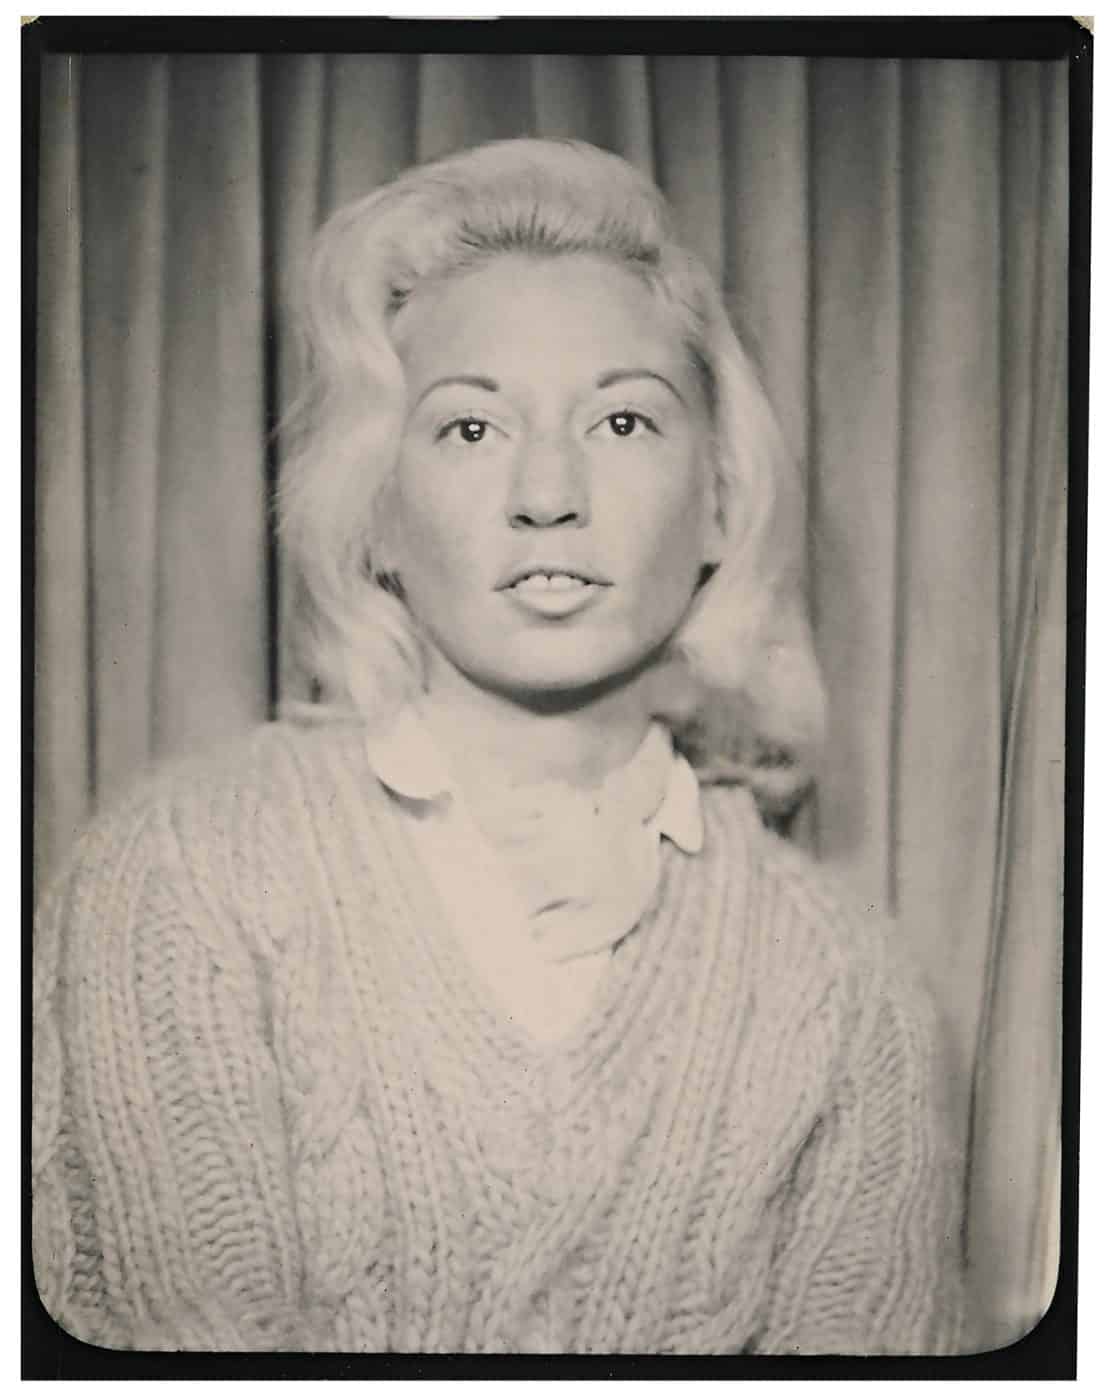  Kali, whose birth name is Joan Marie Yarusso, in a passport photo from the 1960s